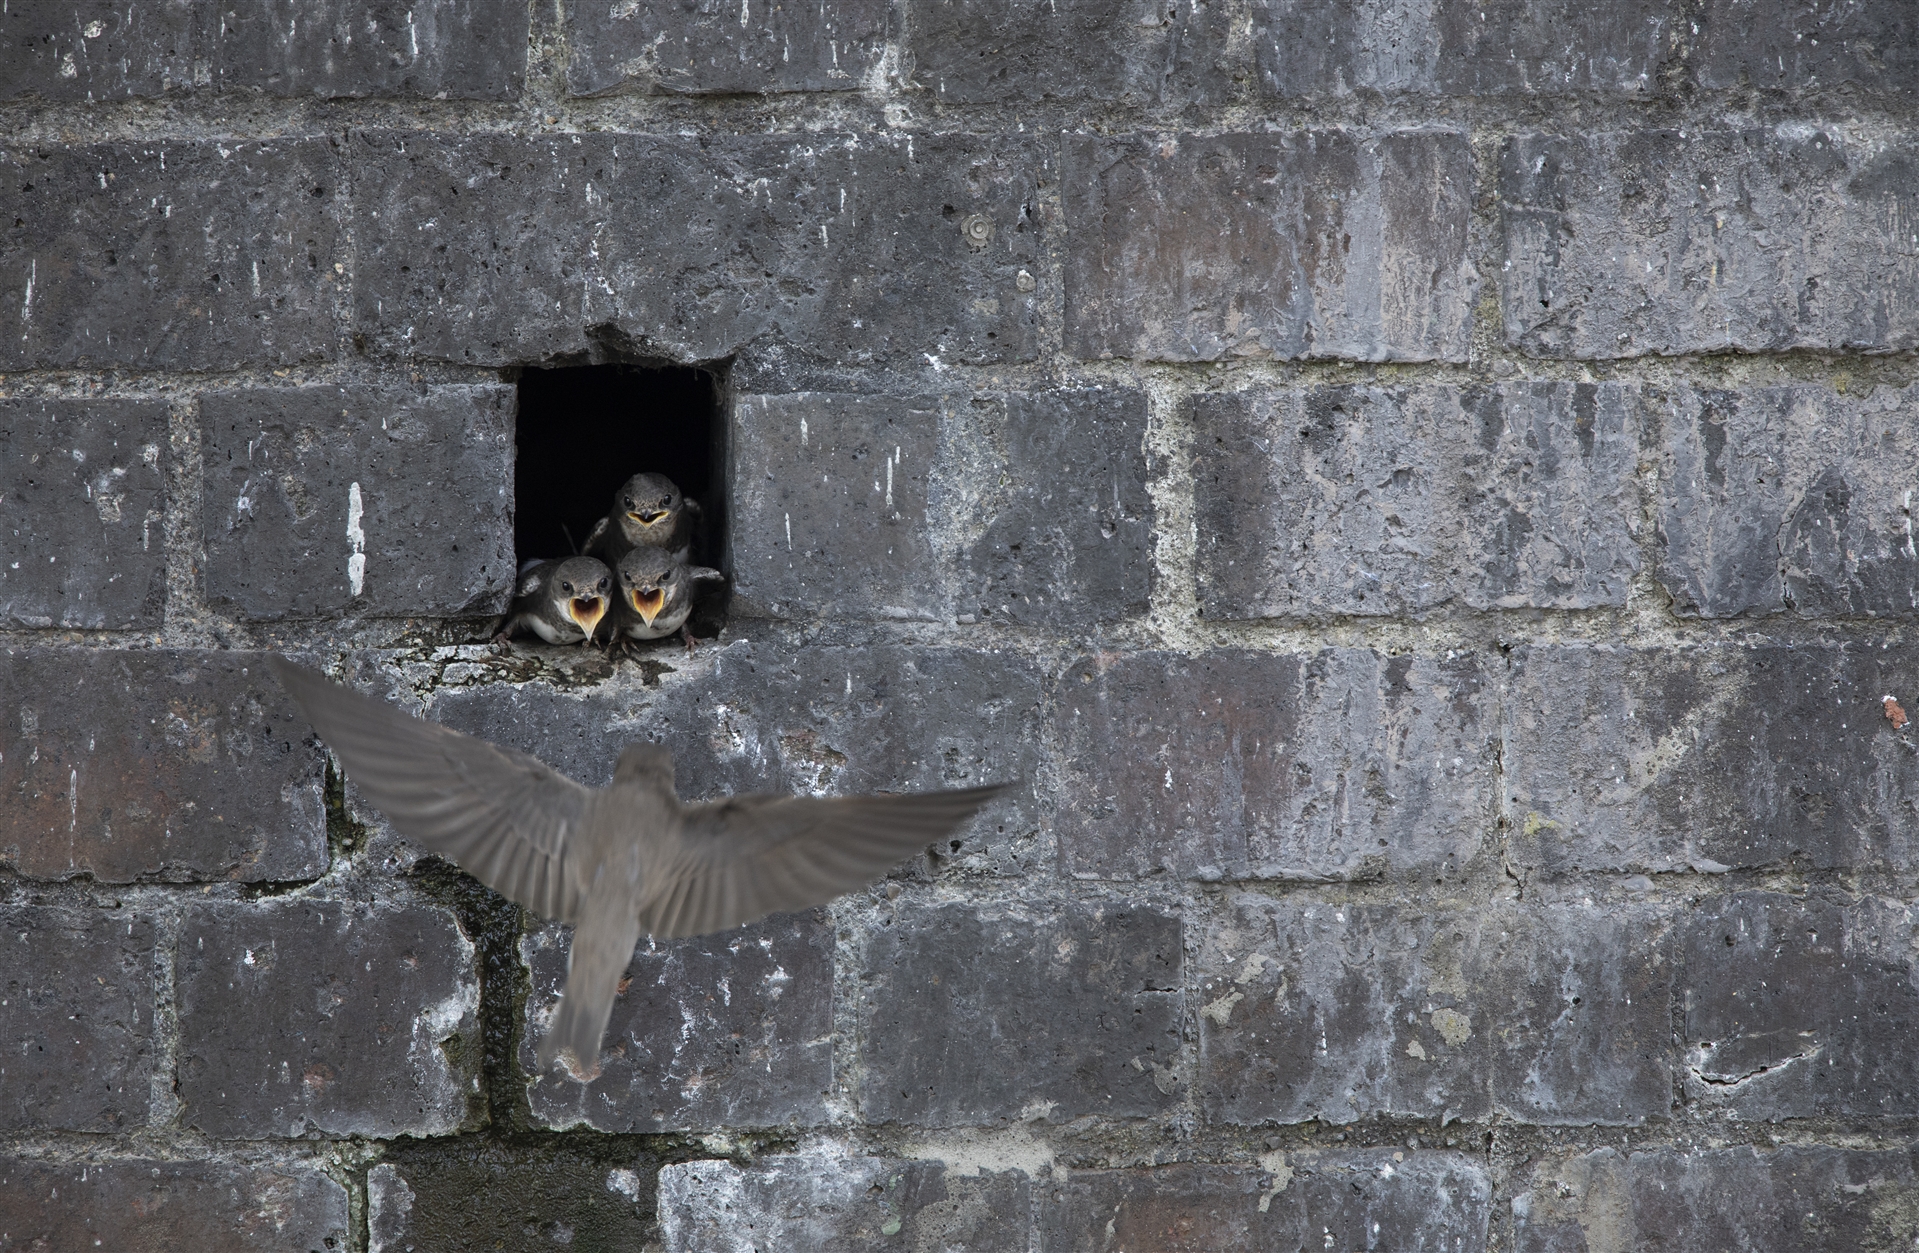 Three yound Sand Martins poking their heads out of a hole in a brick wall with their beaks open. An adult is flying up towards the hole.